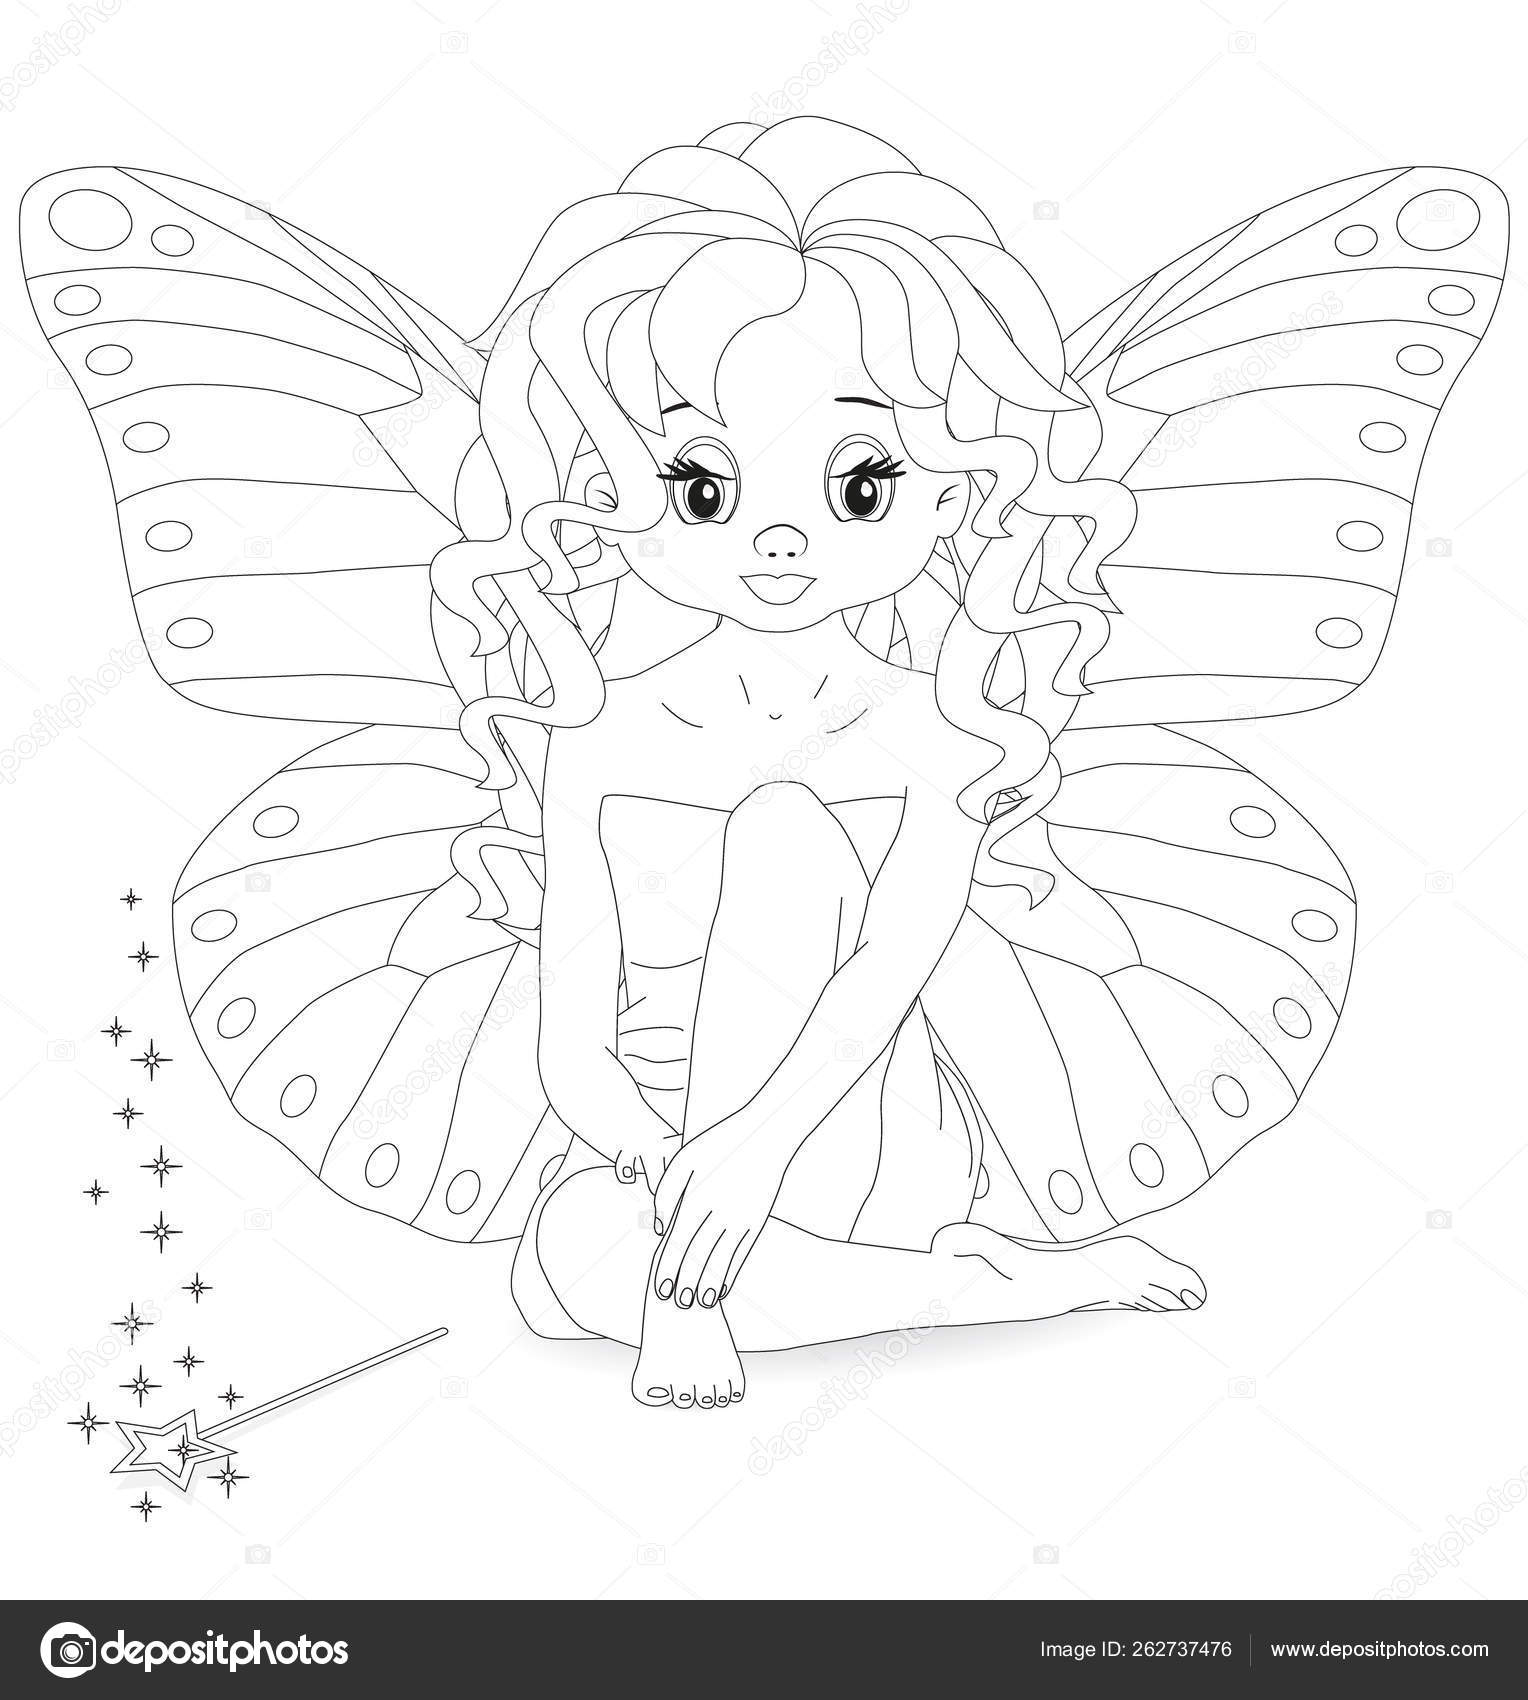 Magical fairy magic wand coloring page stock illustration by yayimages